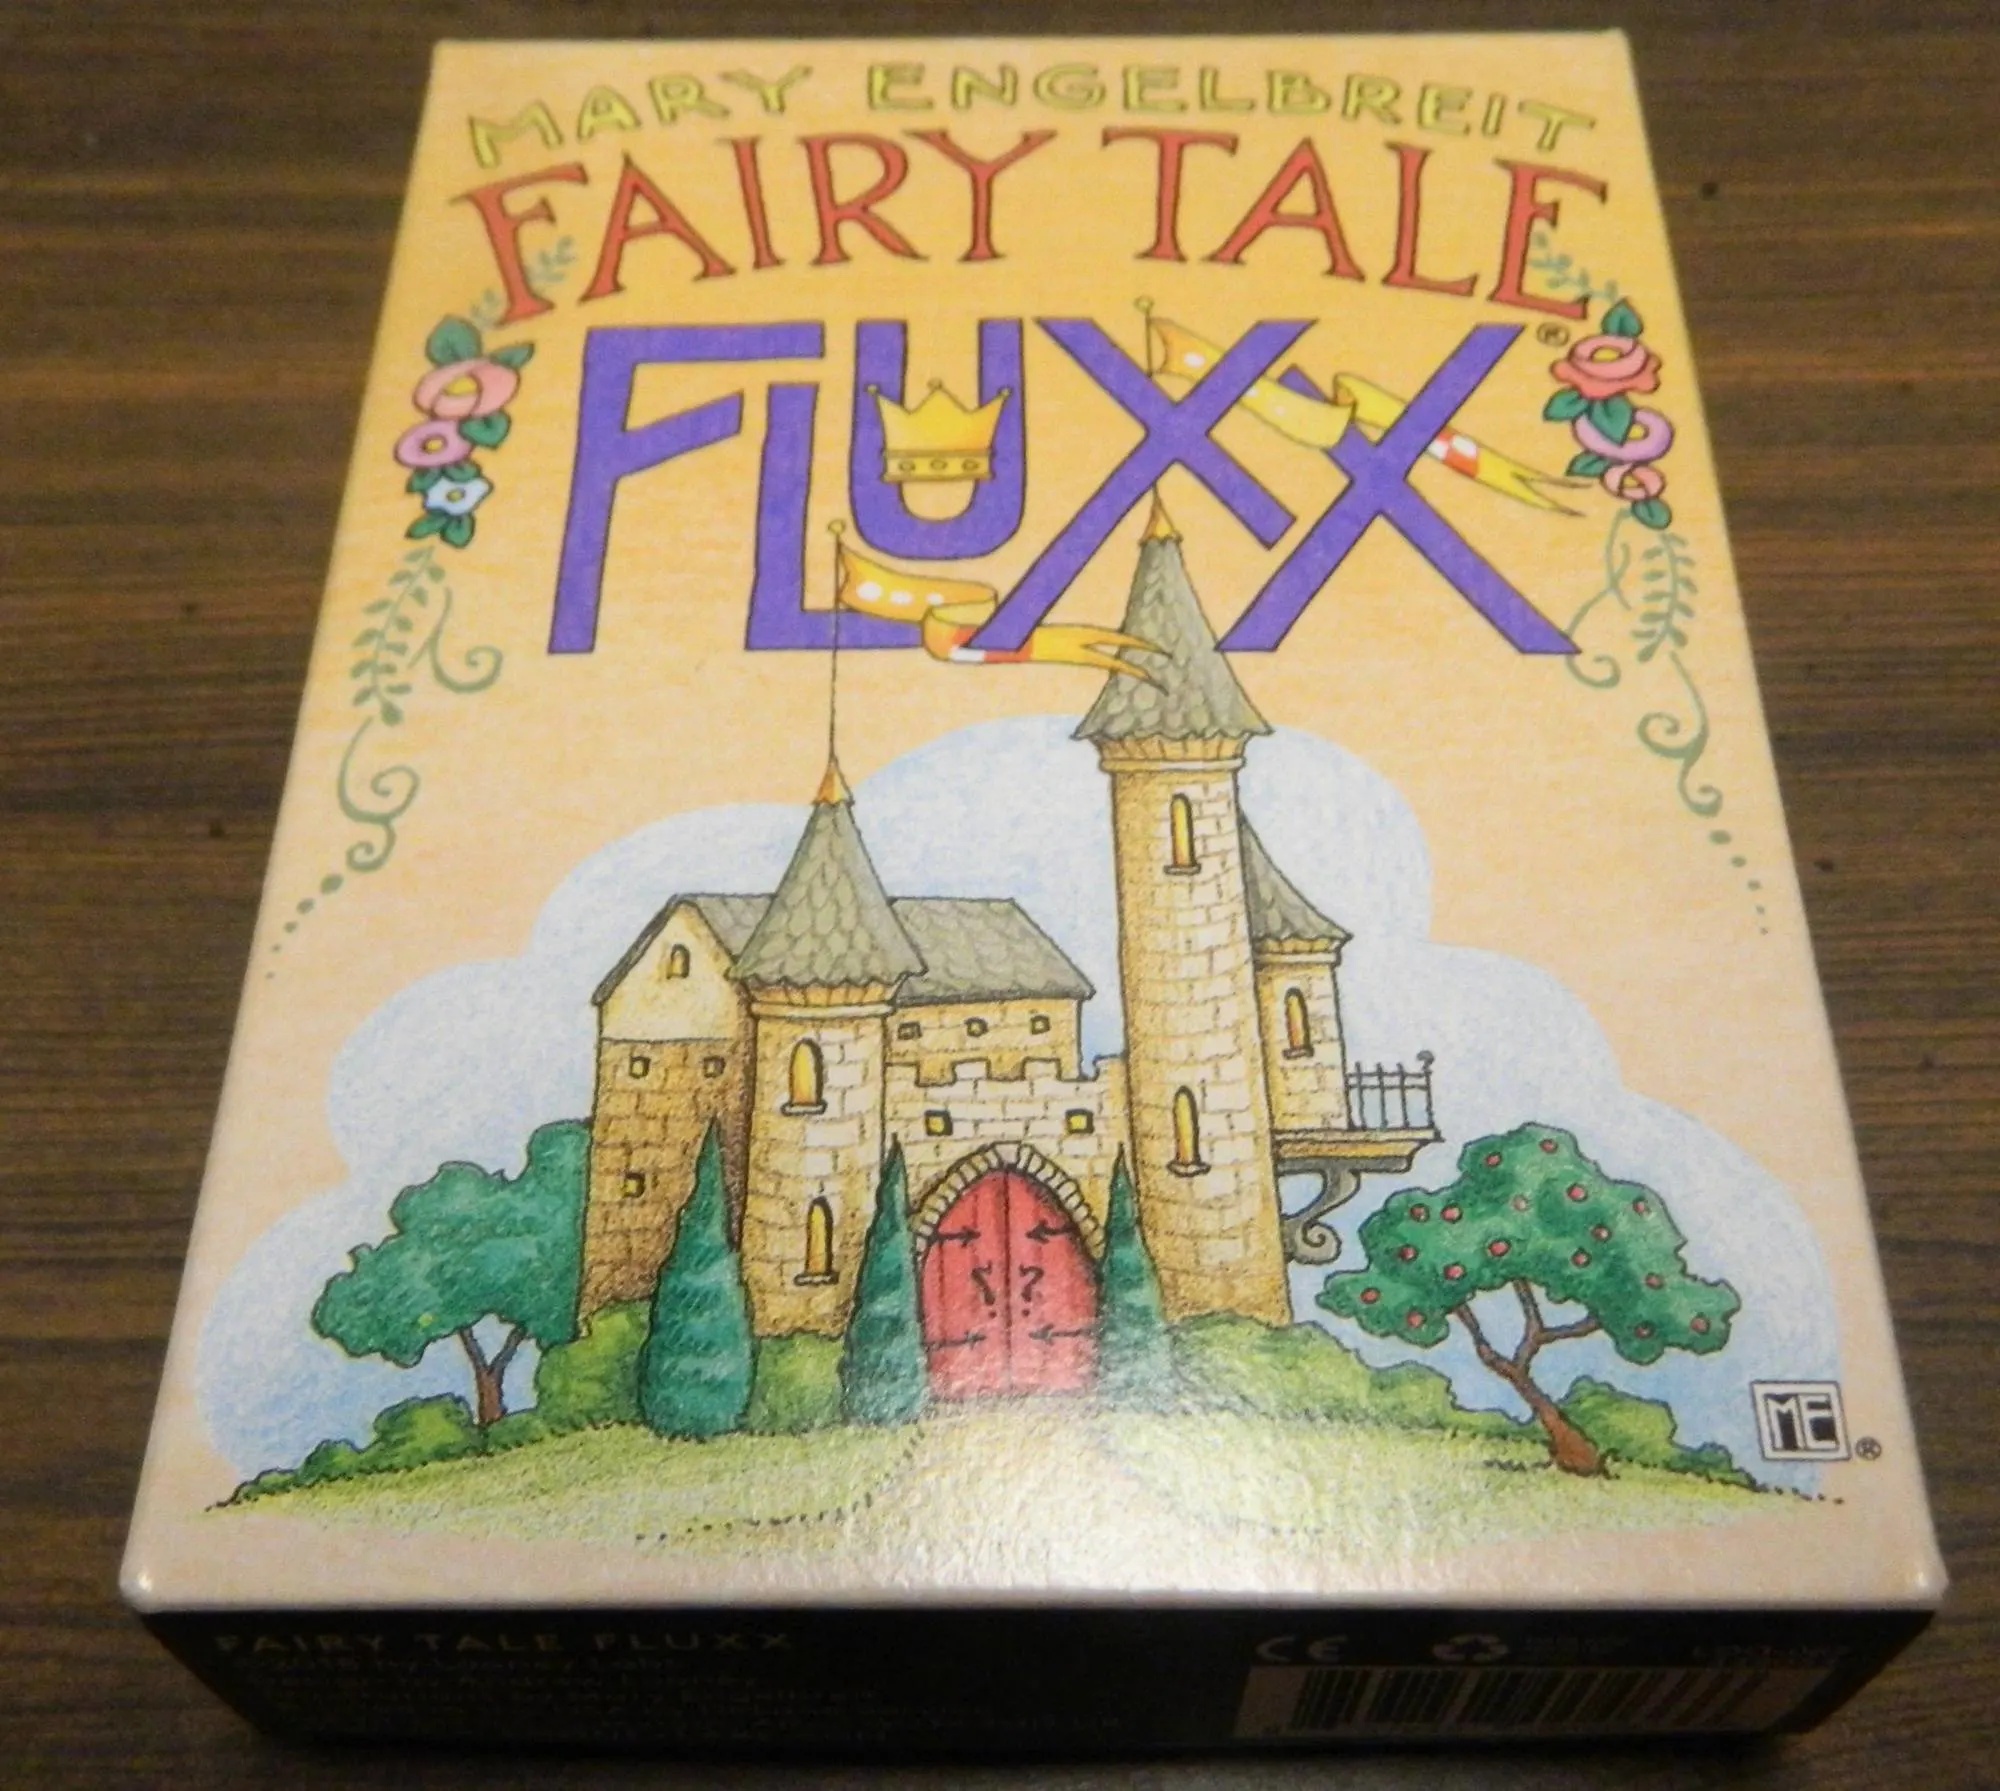 Anatomy Fluxx Review - Board Game Quest